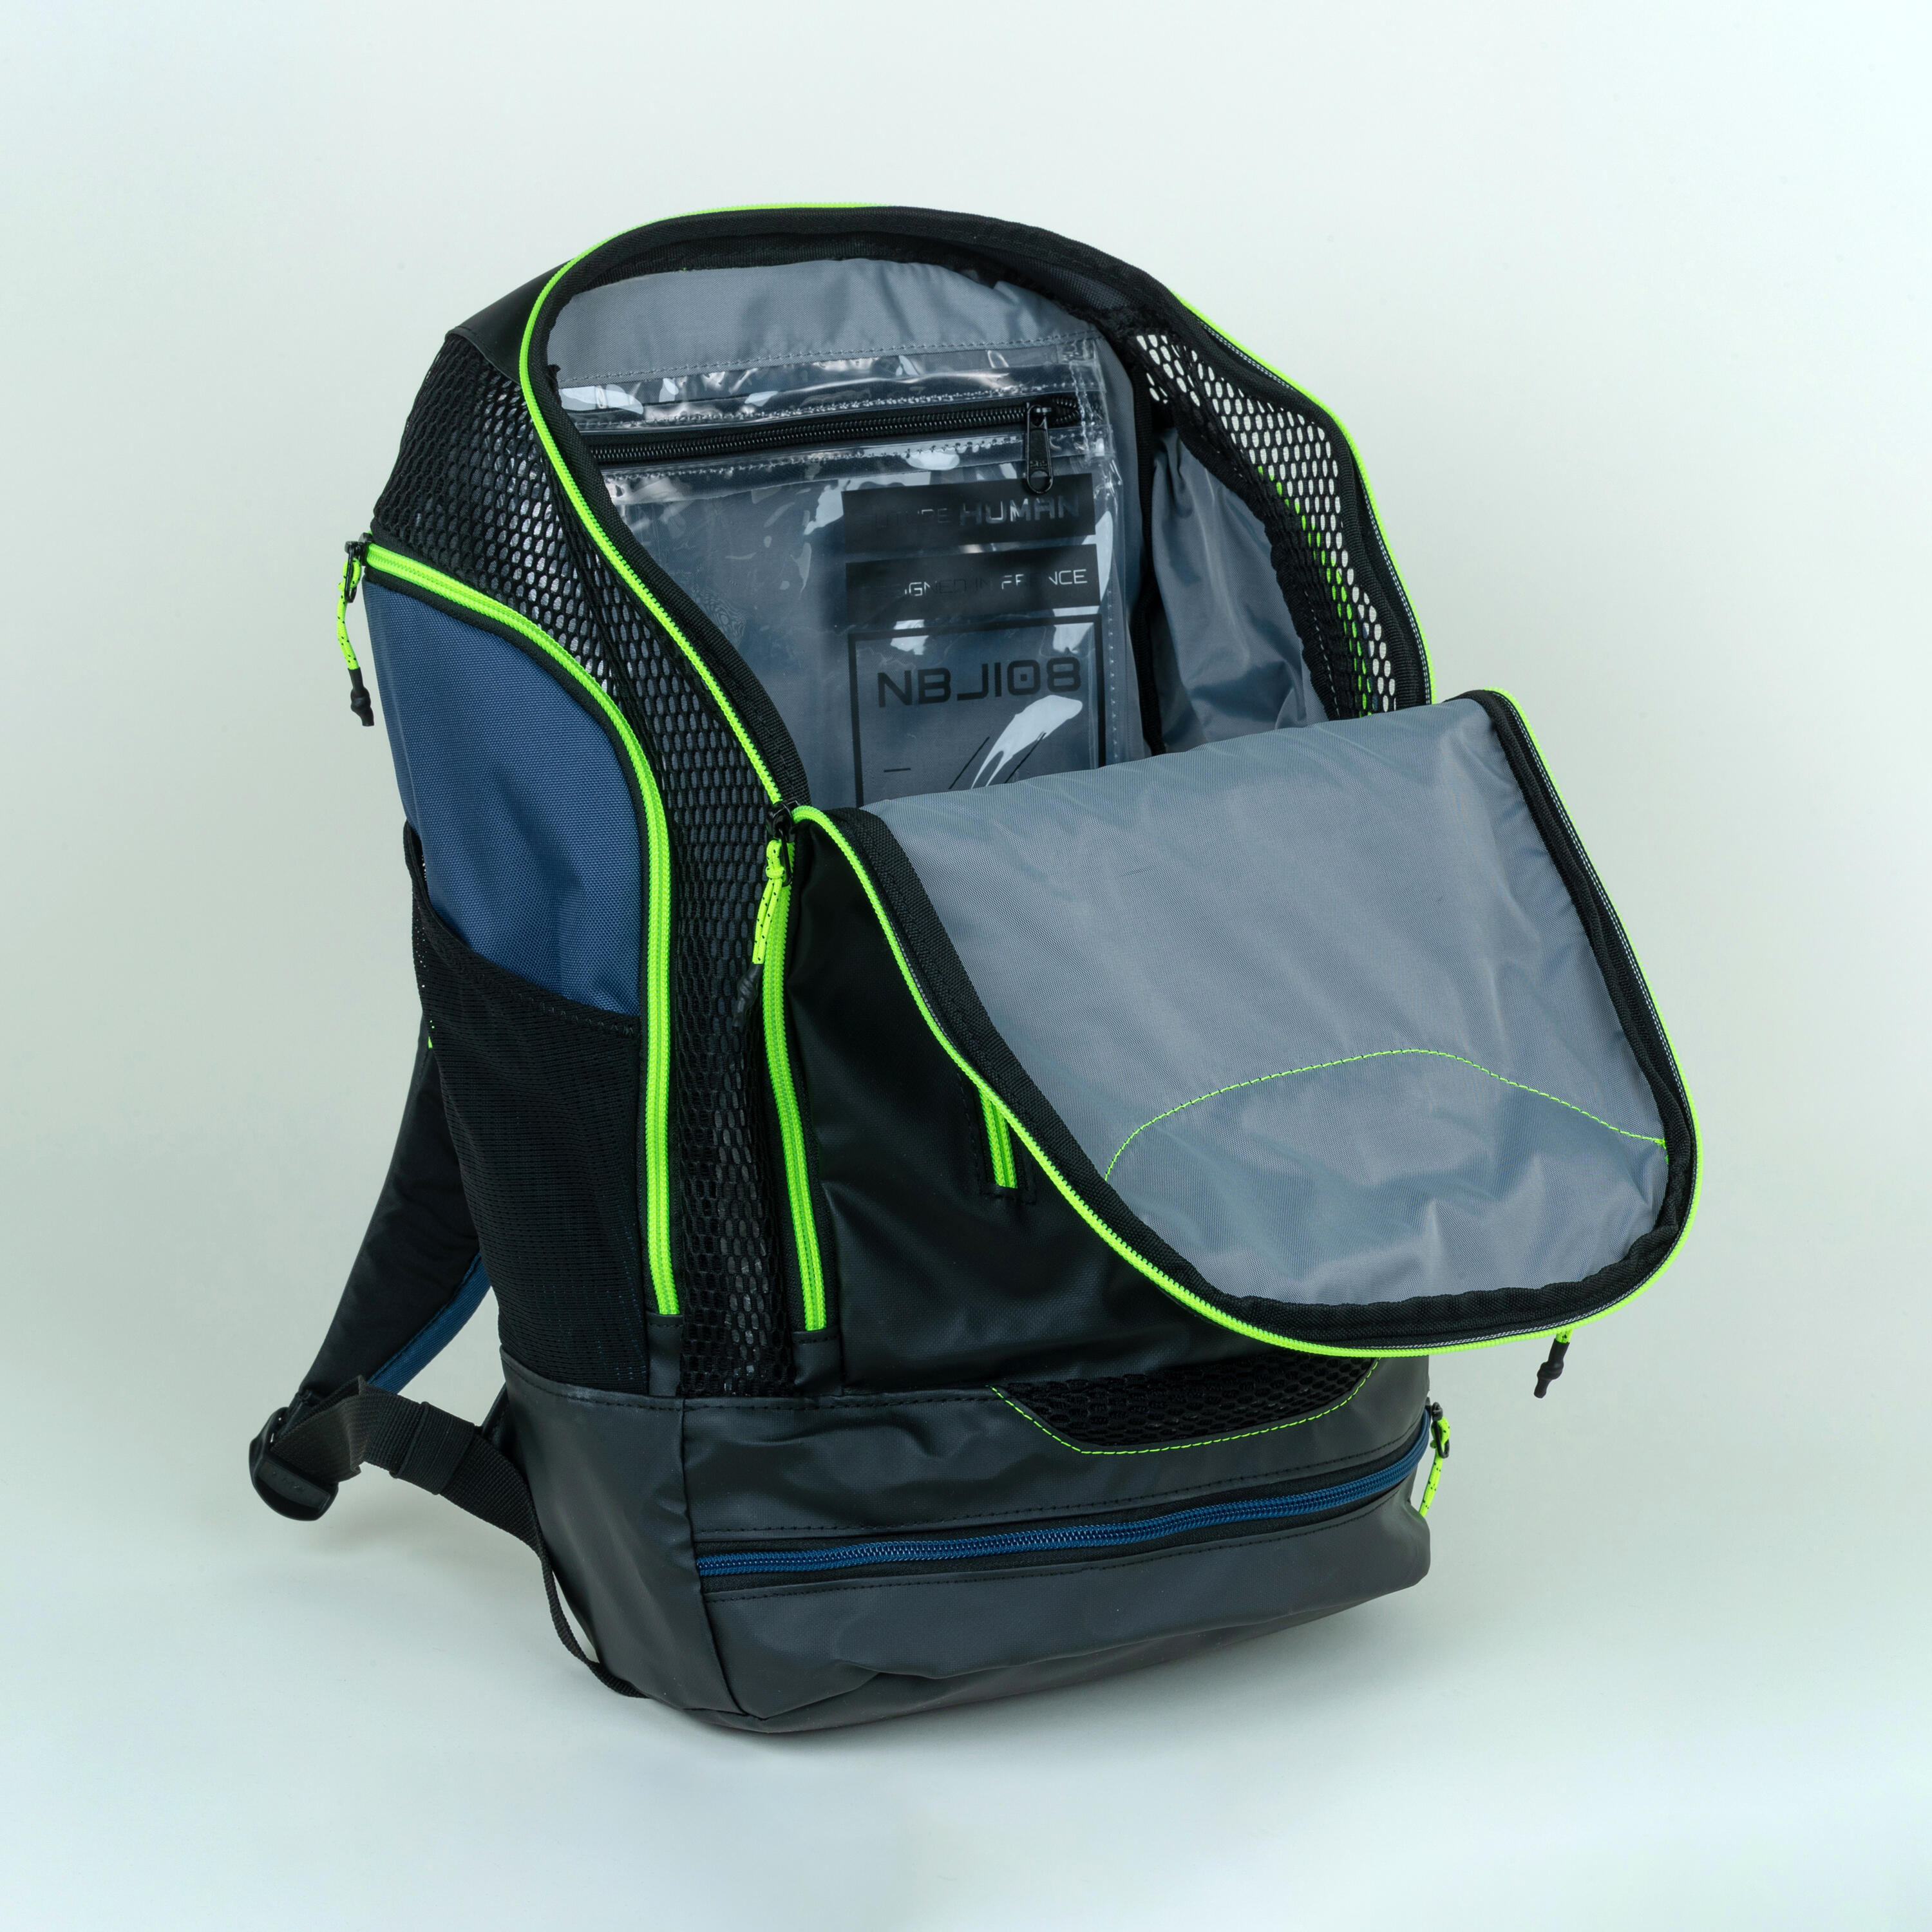 Swimming Backpack 27 Litres 900 - BLACK YELLOW 5/6